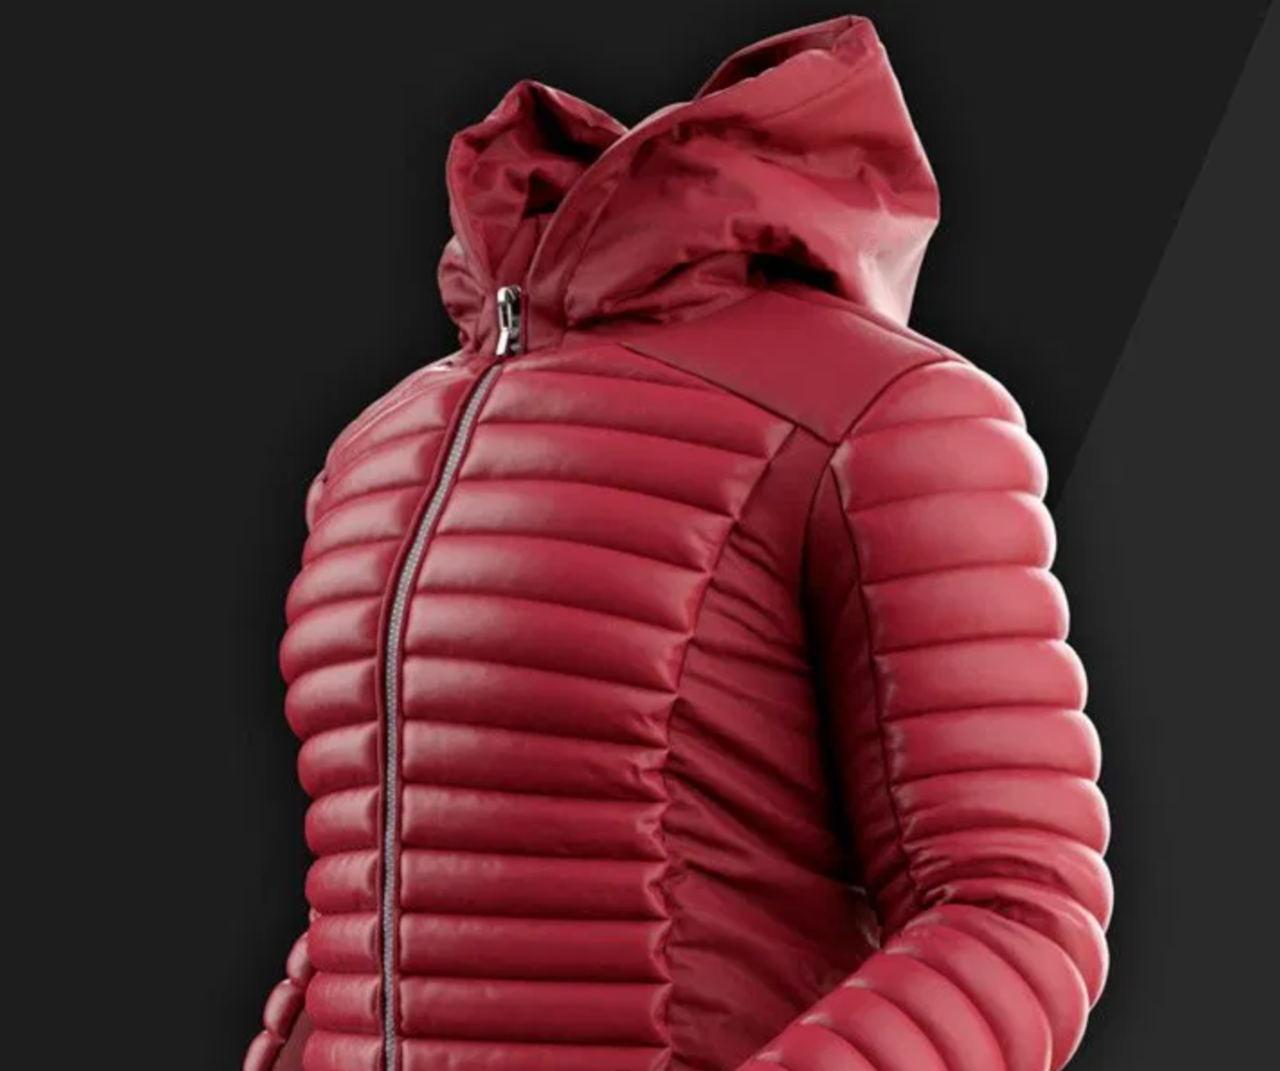 3D prototype of a padded jacket created with 3D technology